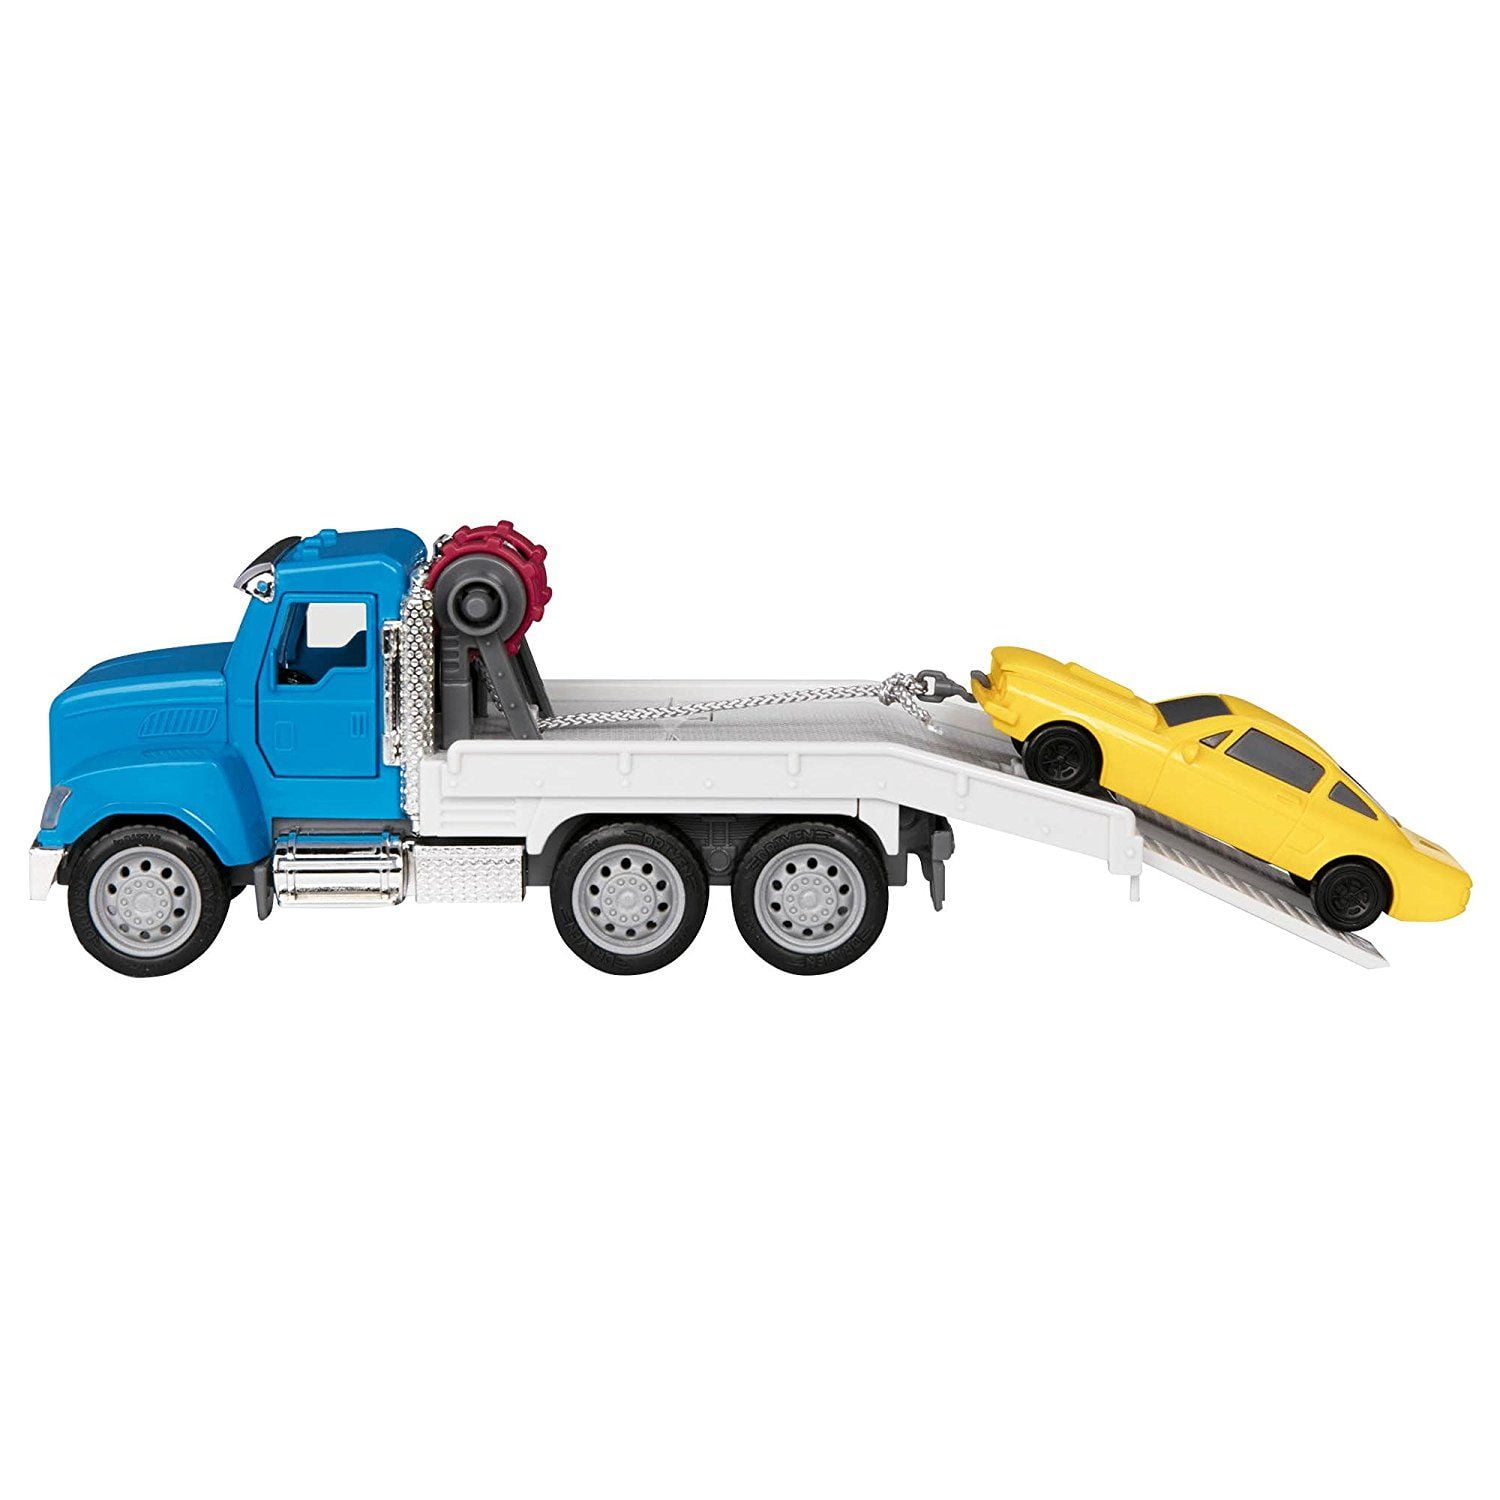 Take-apart Crane Truck Toy Vehicle Assembly Playset With for sale online Battat 